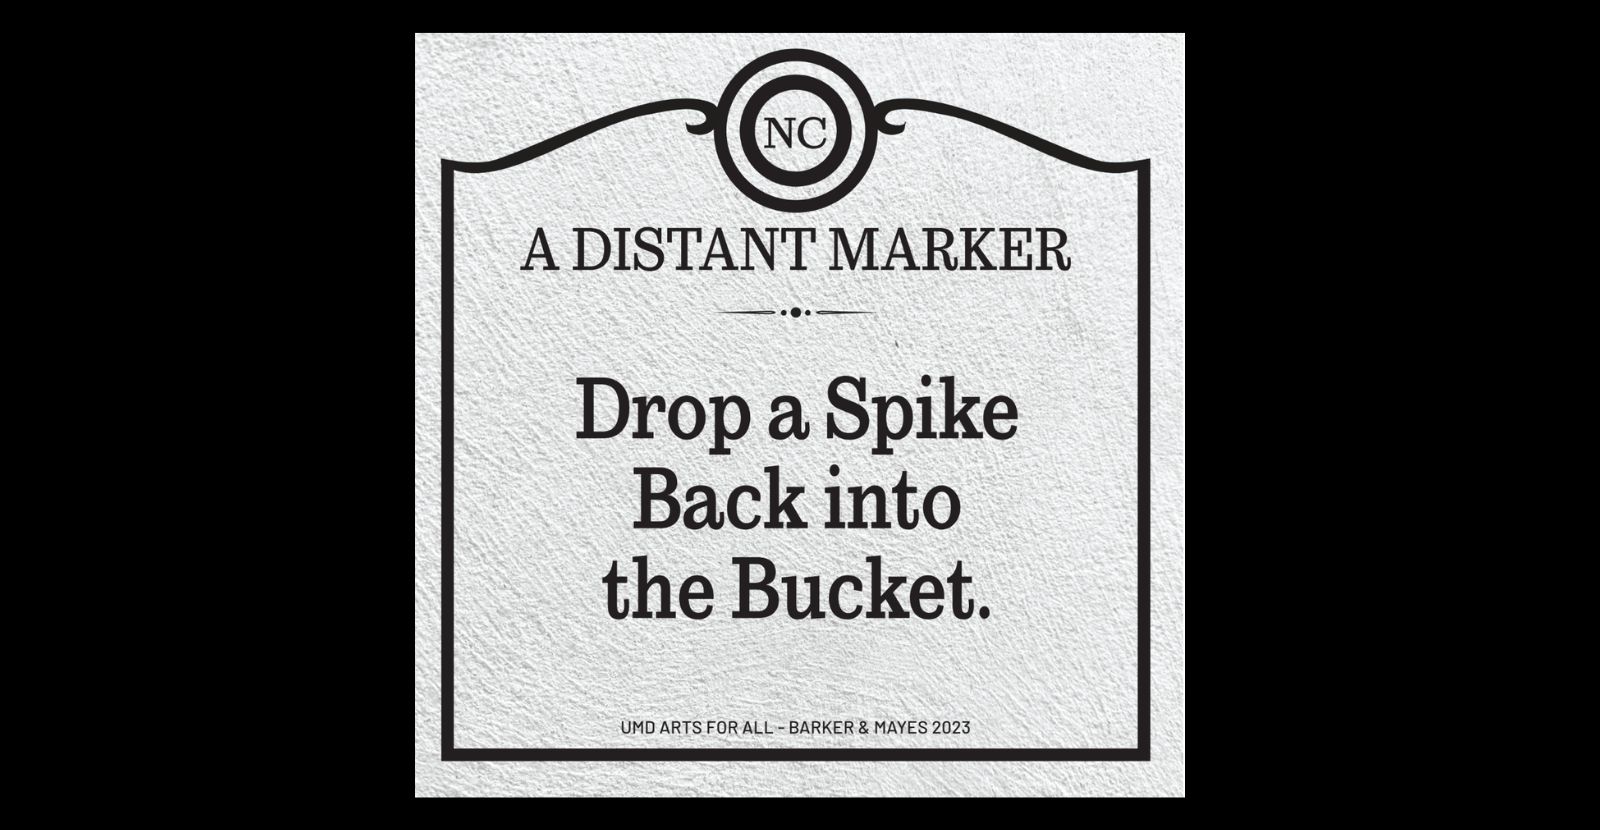 A Distant Marker: Drop a Spike Back into the Bucket.